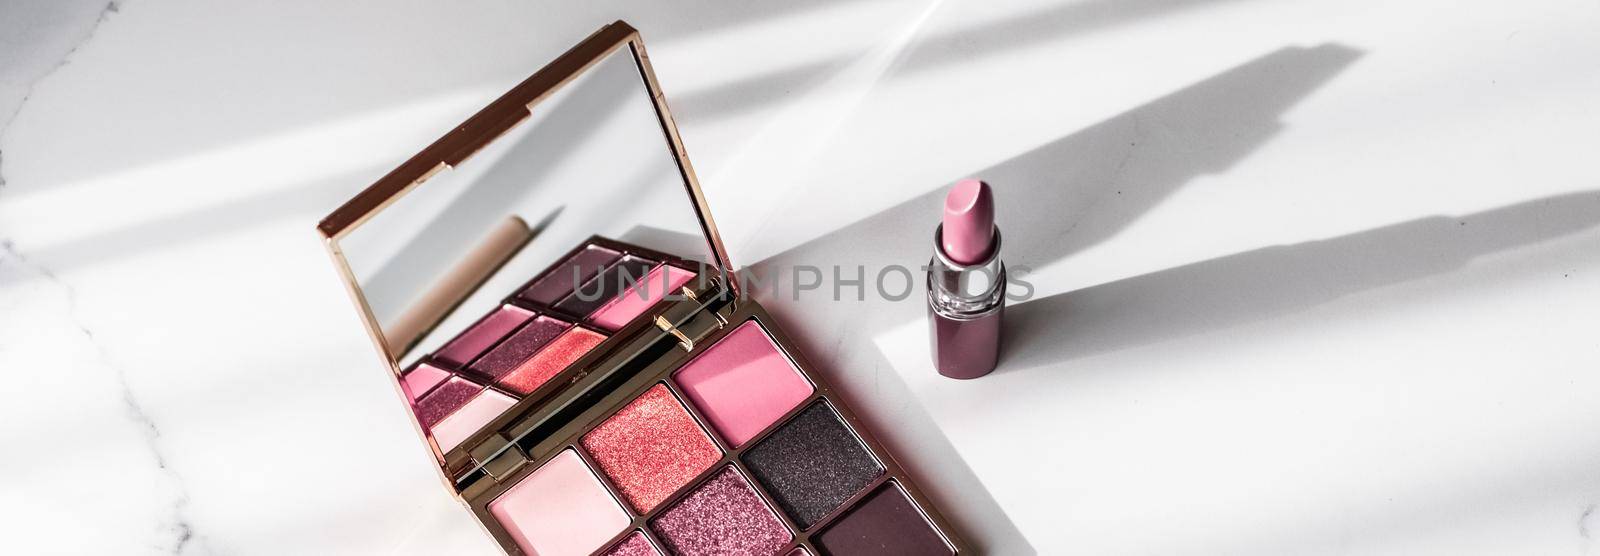 Cosmetics, makeup products set on marble vanity table, lipstick, eyeshadows and make-up brush for luxury beauty and fashion brand ads, holiday design by Anneleven